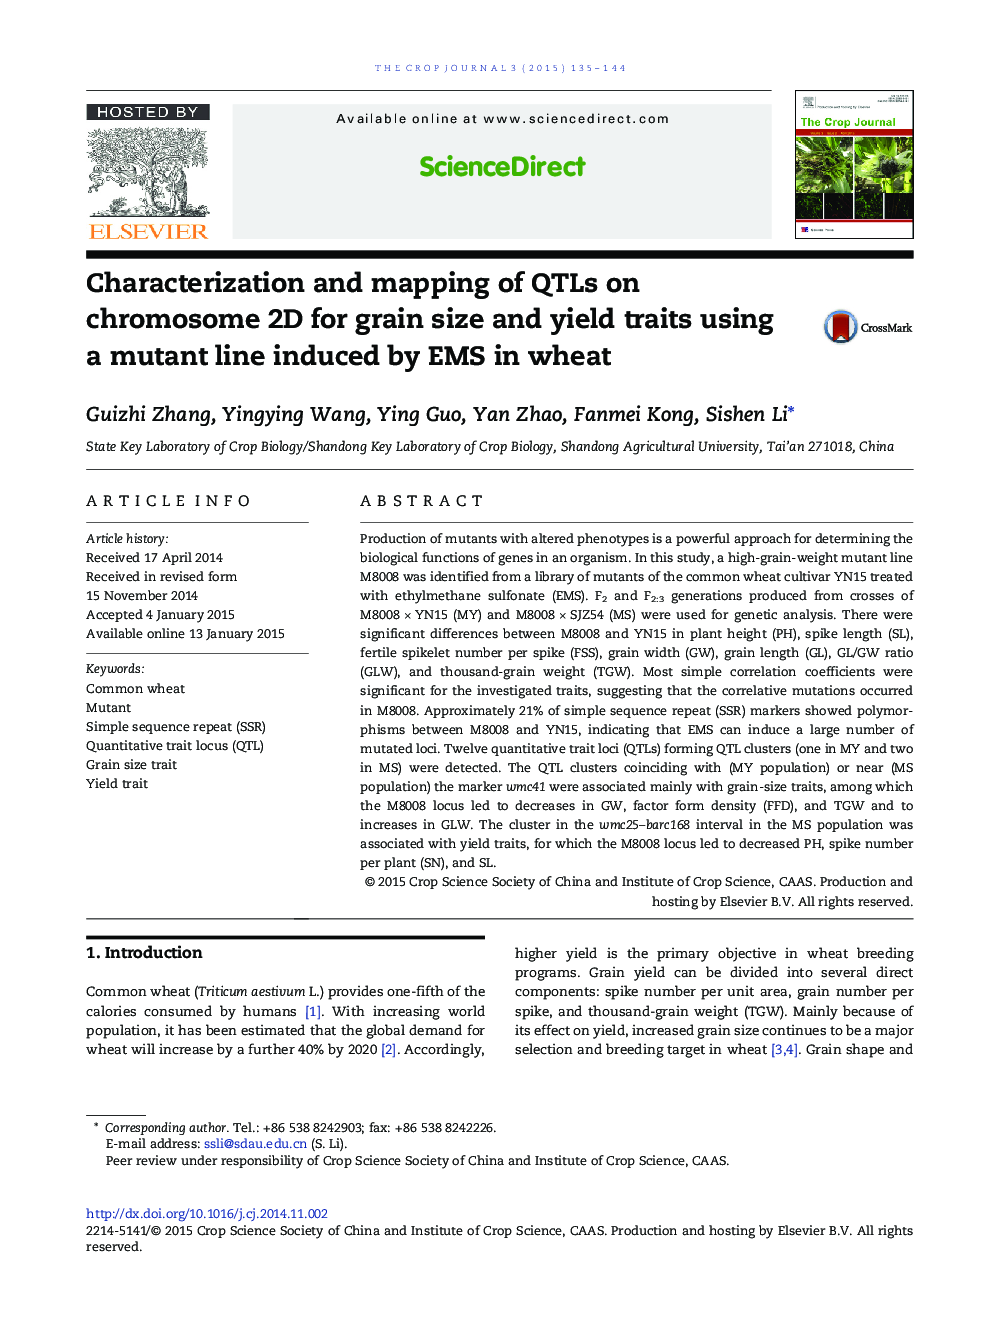 Characterization and mapping of QTLs on chromosome 2D for grain size and yield traits using a mutant line induced by EMS in wheat